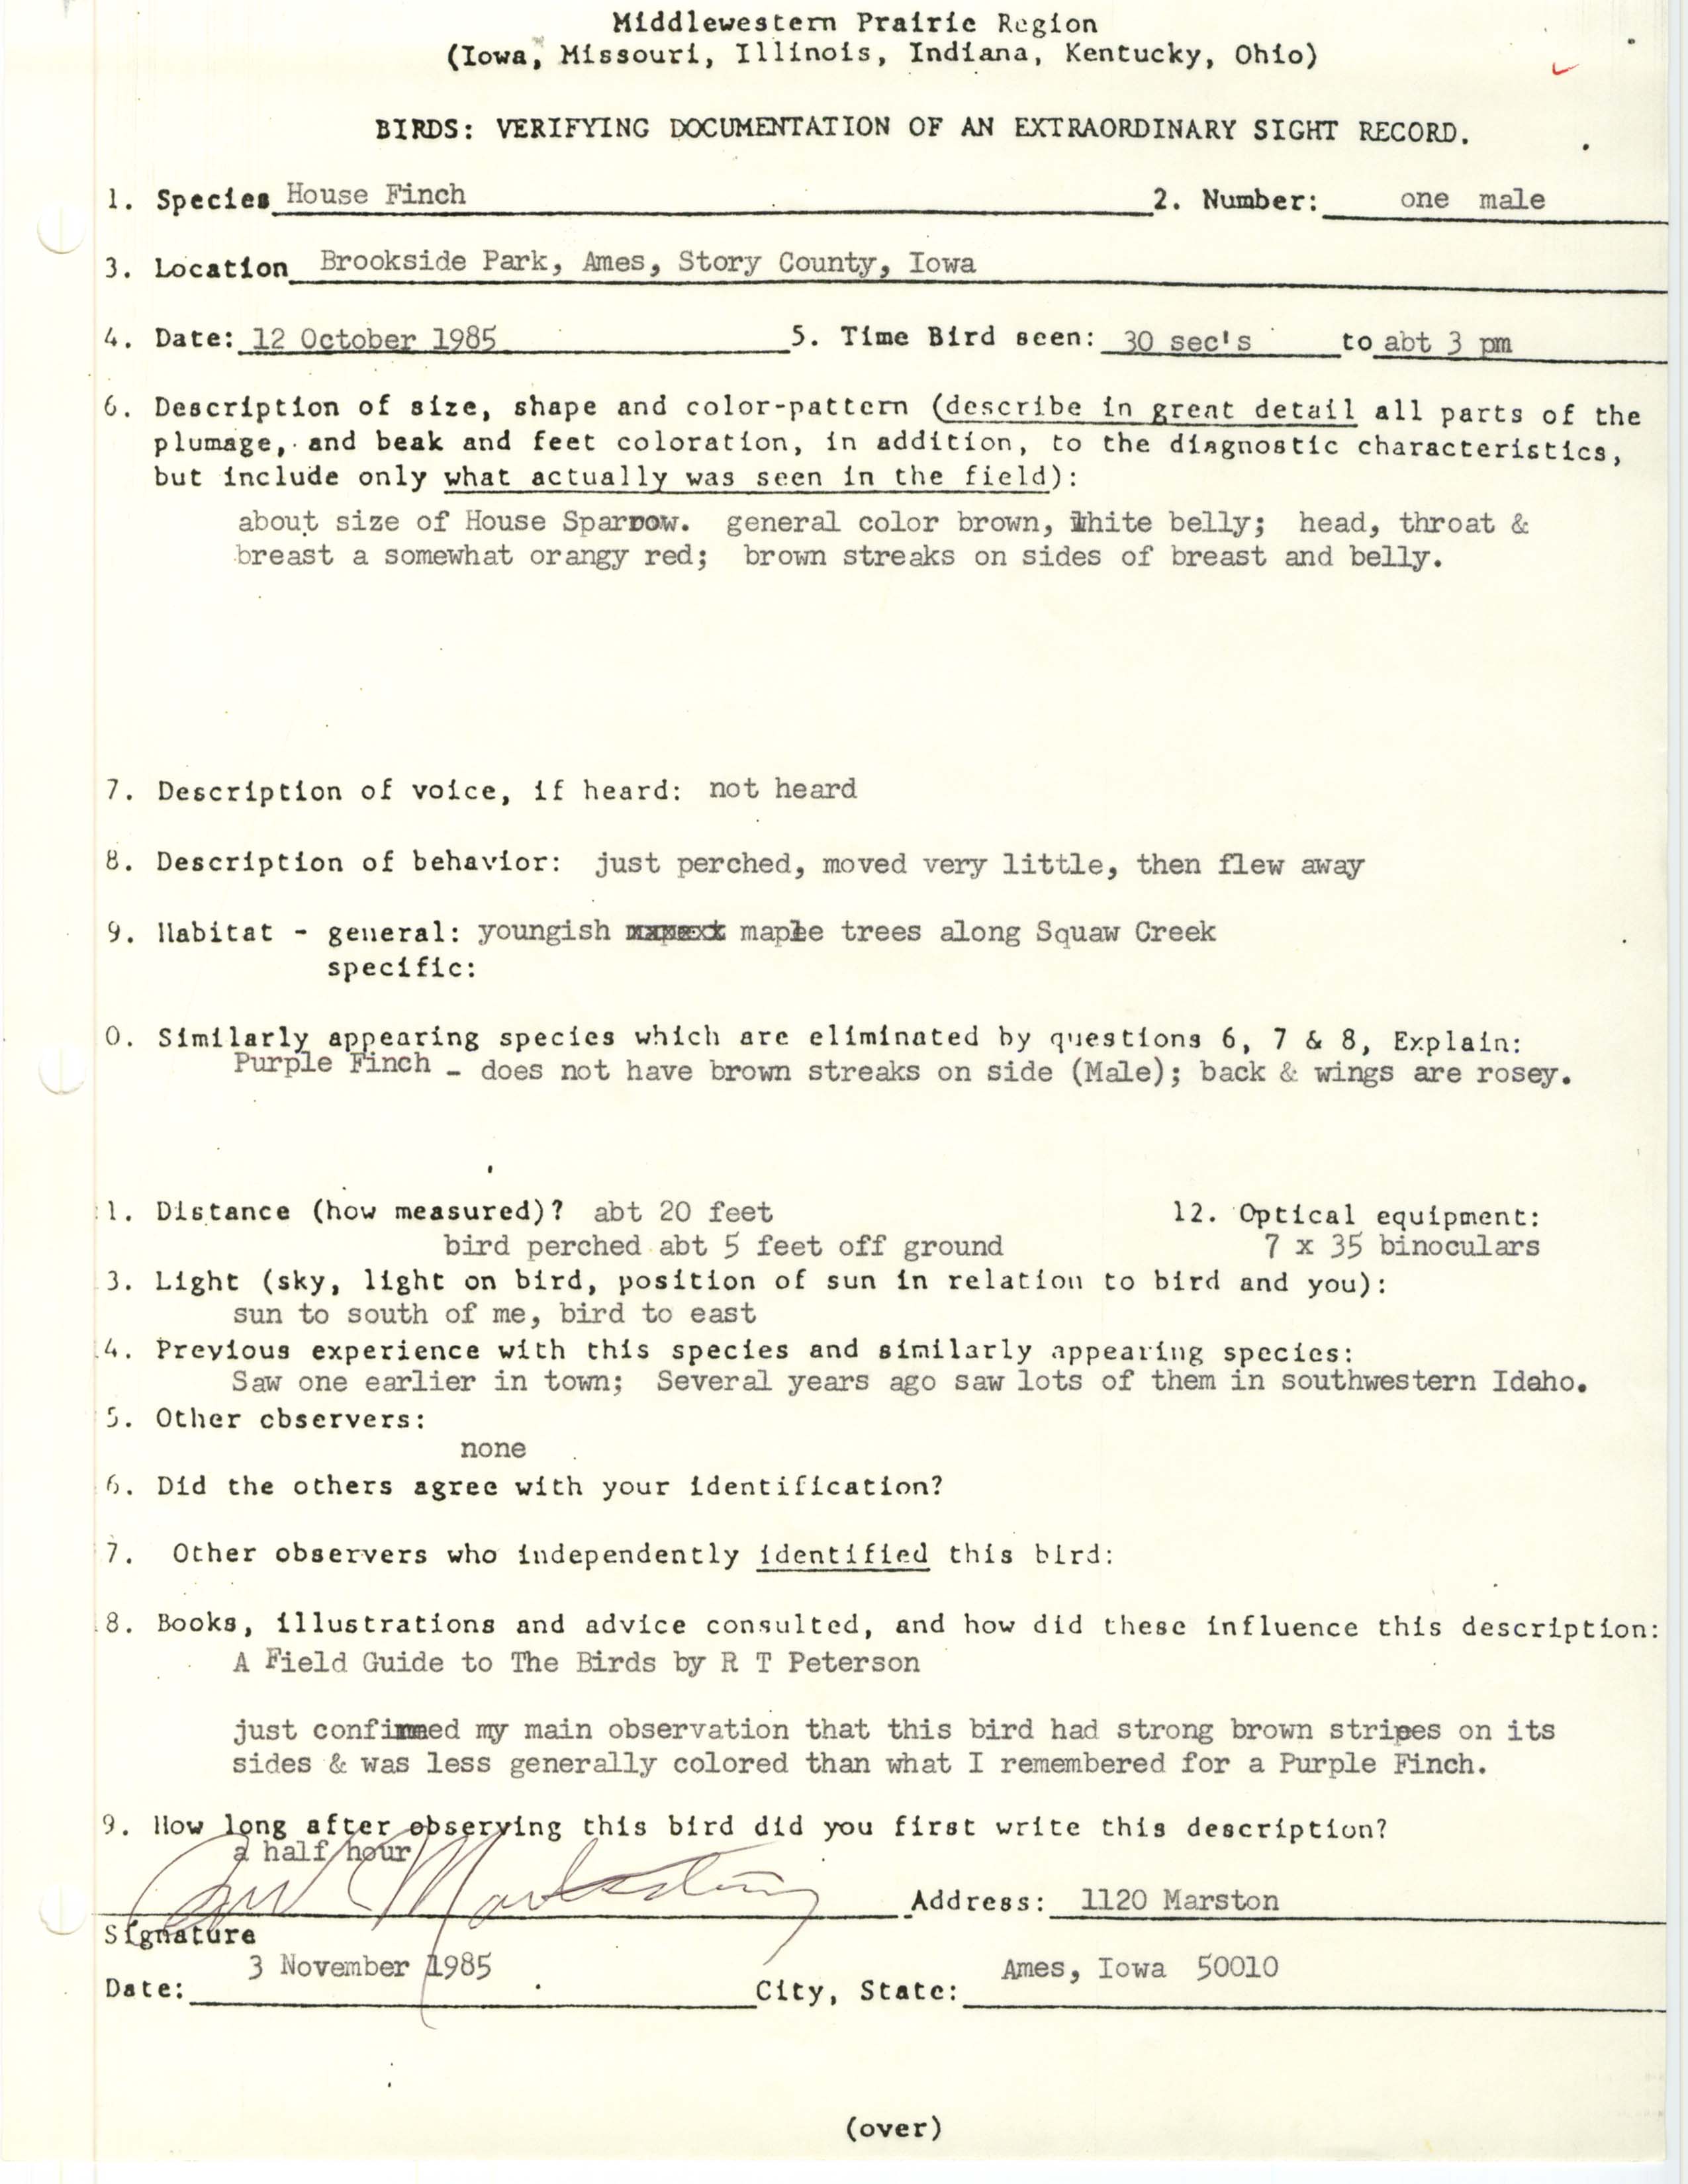 Rare bird documentation form for House Finch at Brookside Park in Ames, 1985